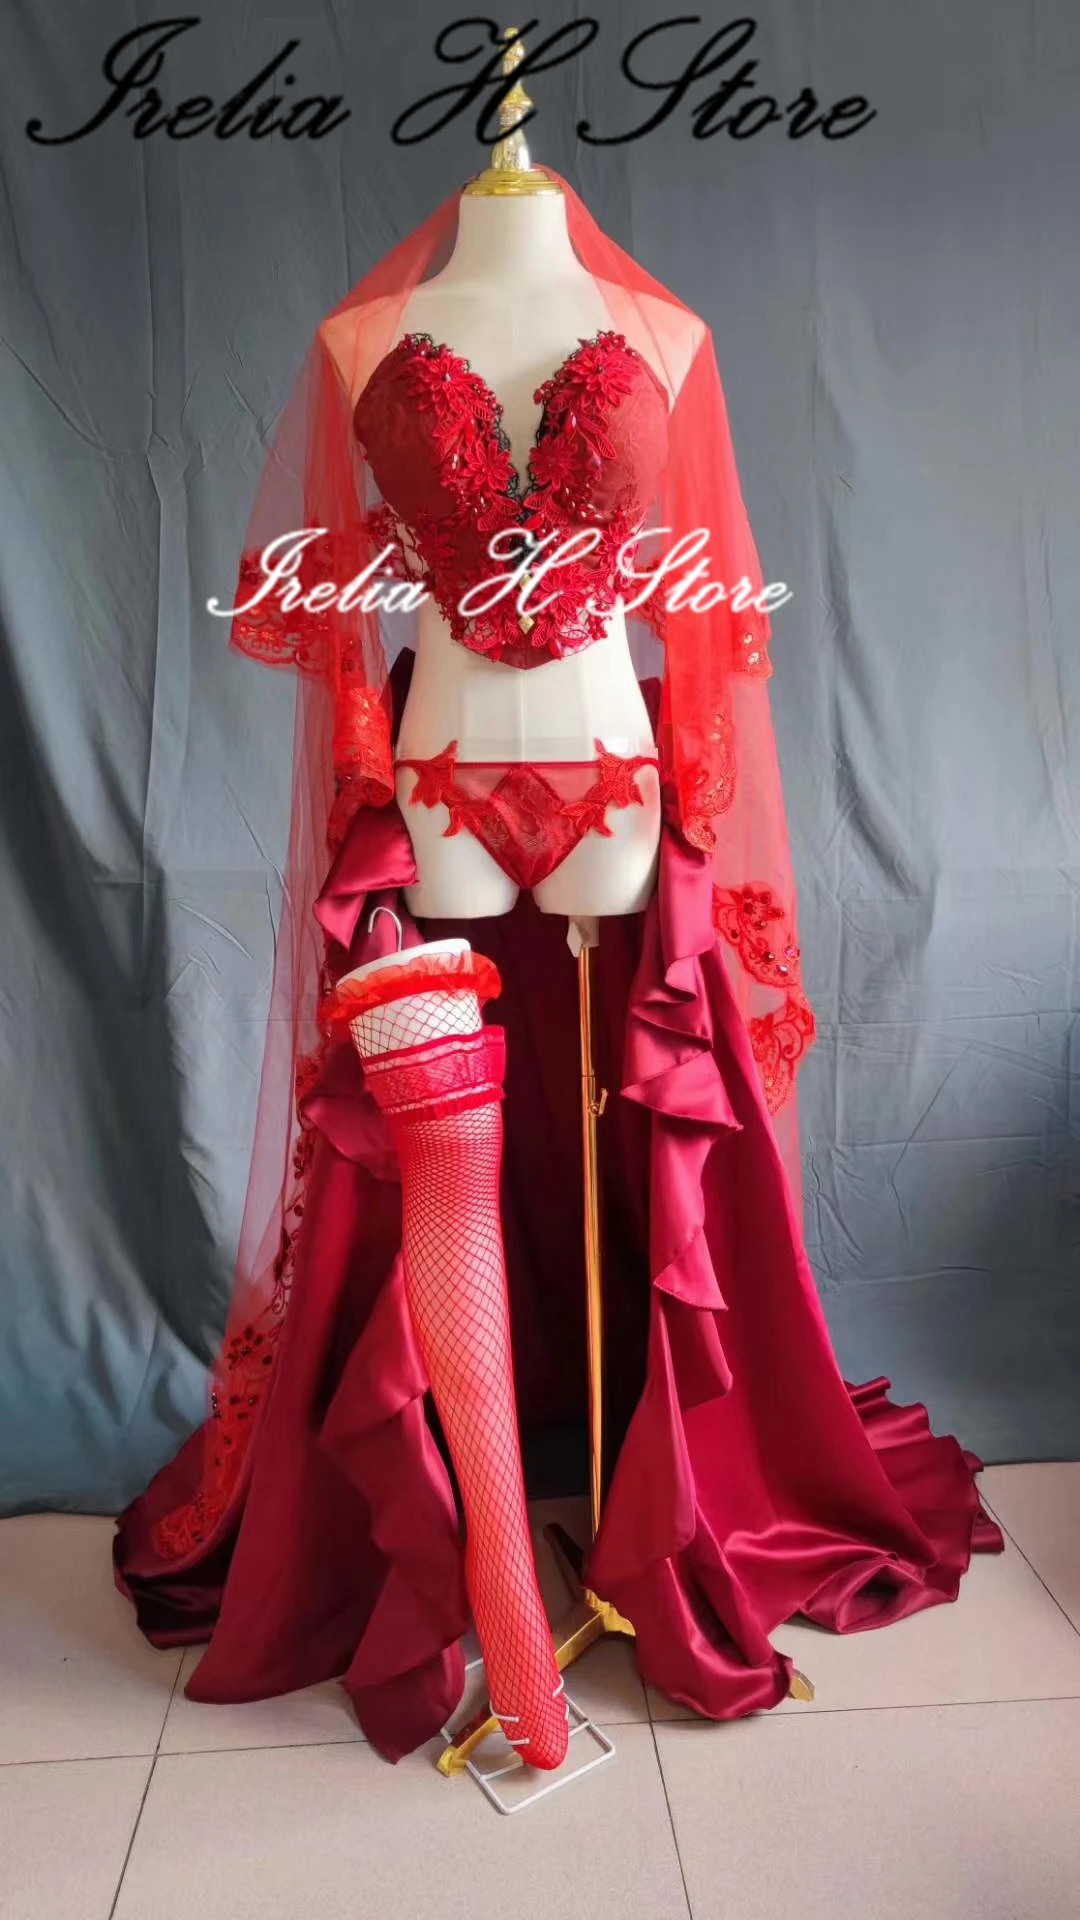 

Irelia H Store Alice Final Fantasy VII Fan art Aerith Sexy Lingeries Cosplay Costume High quality custom made/size